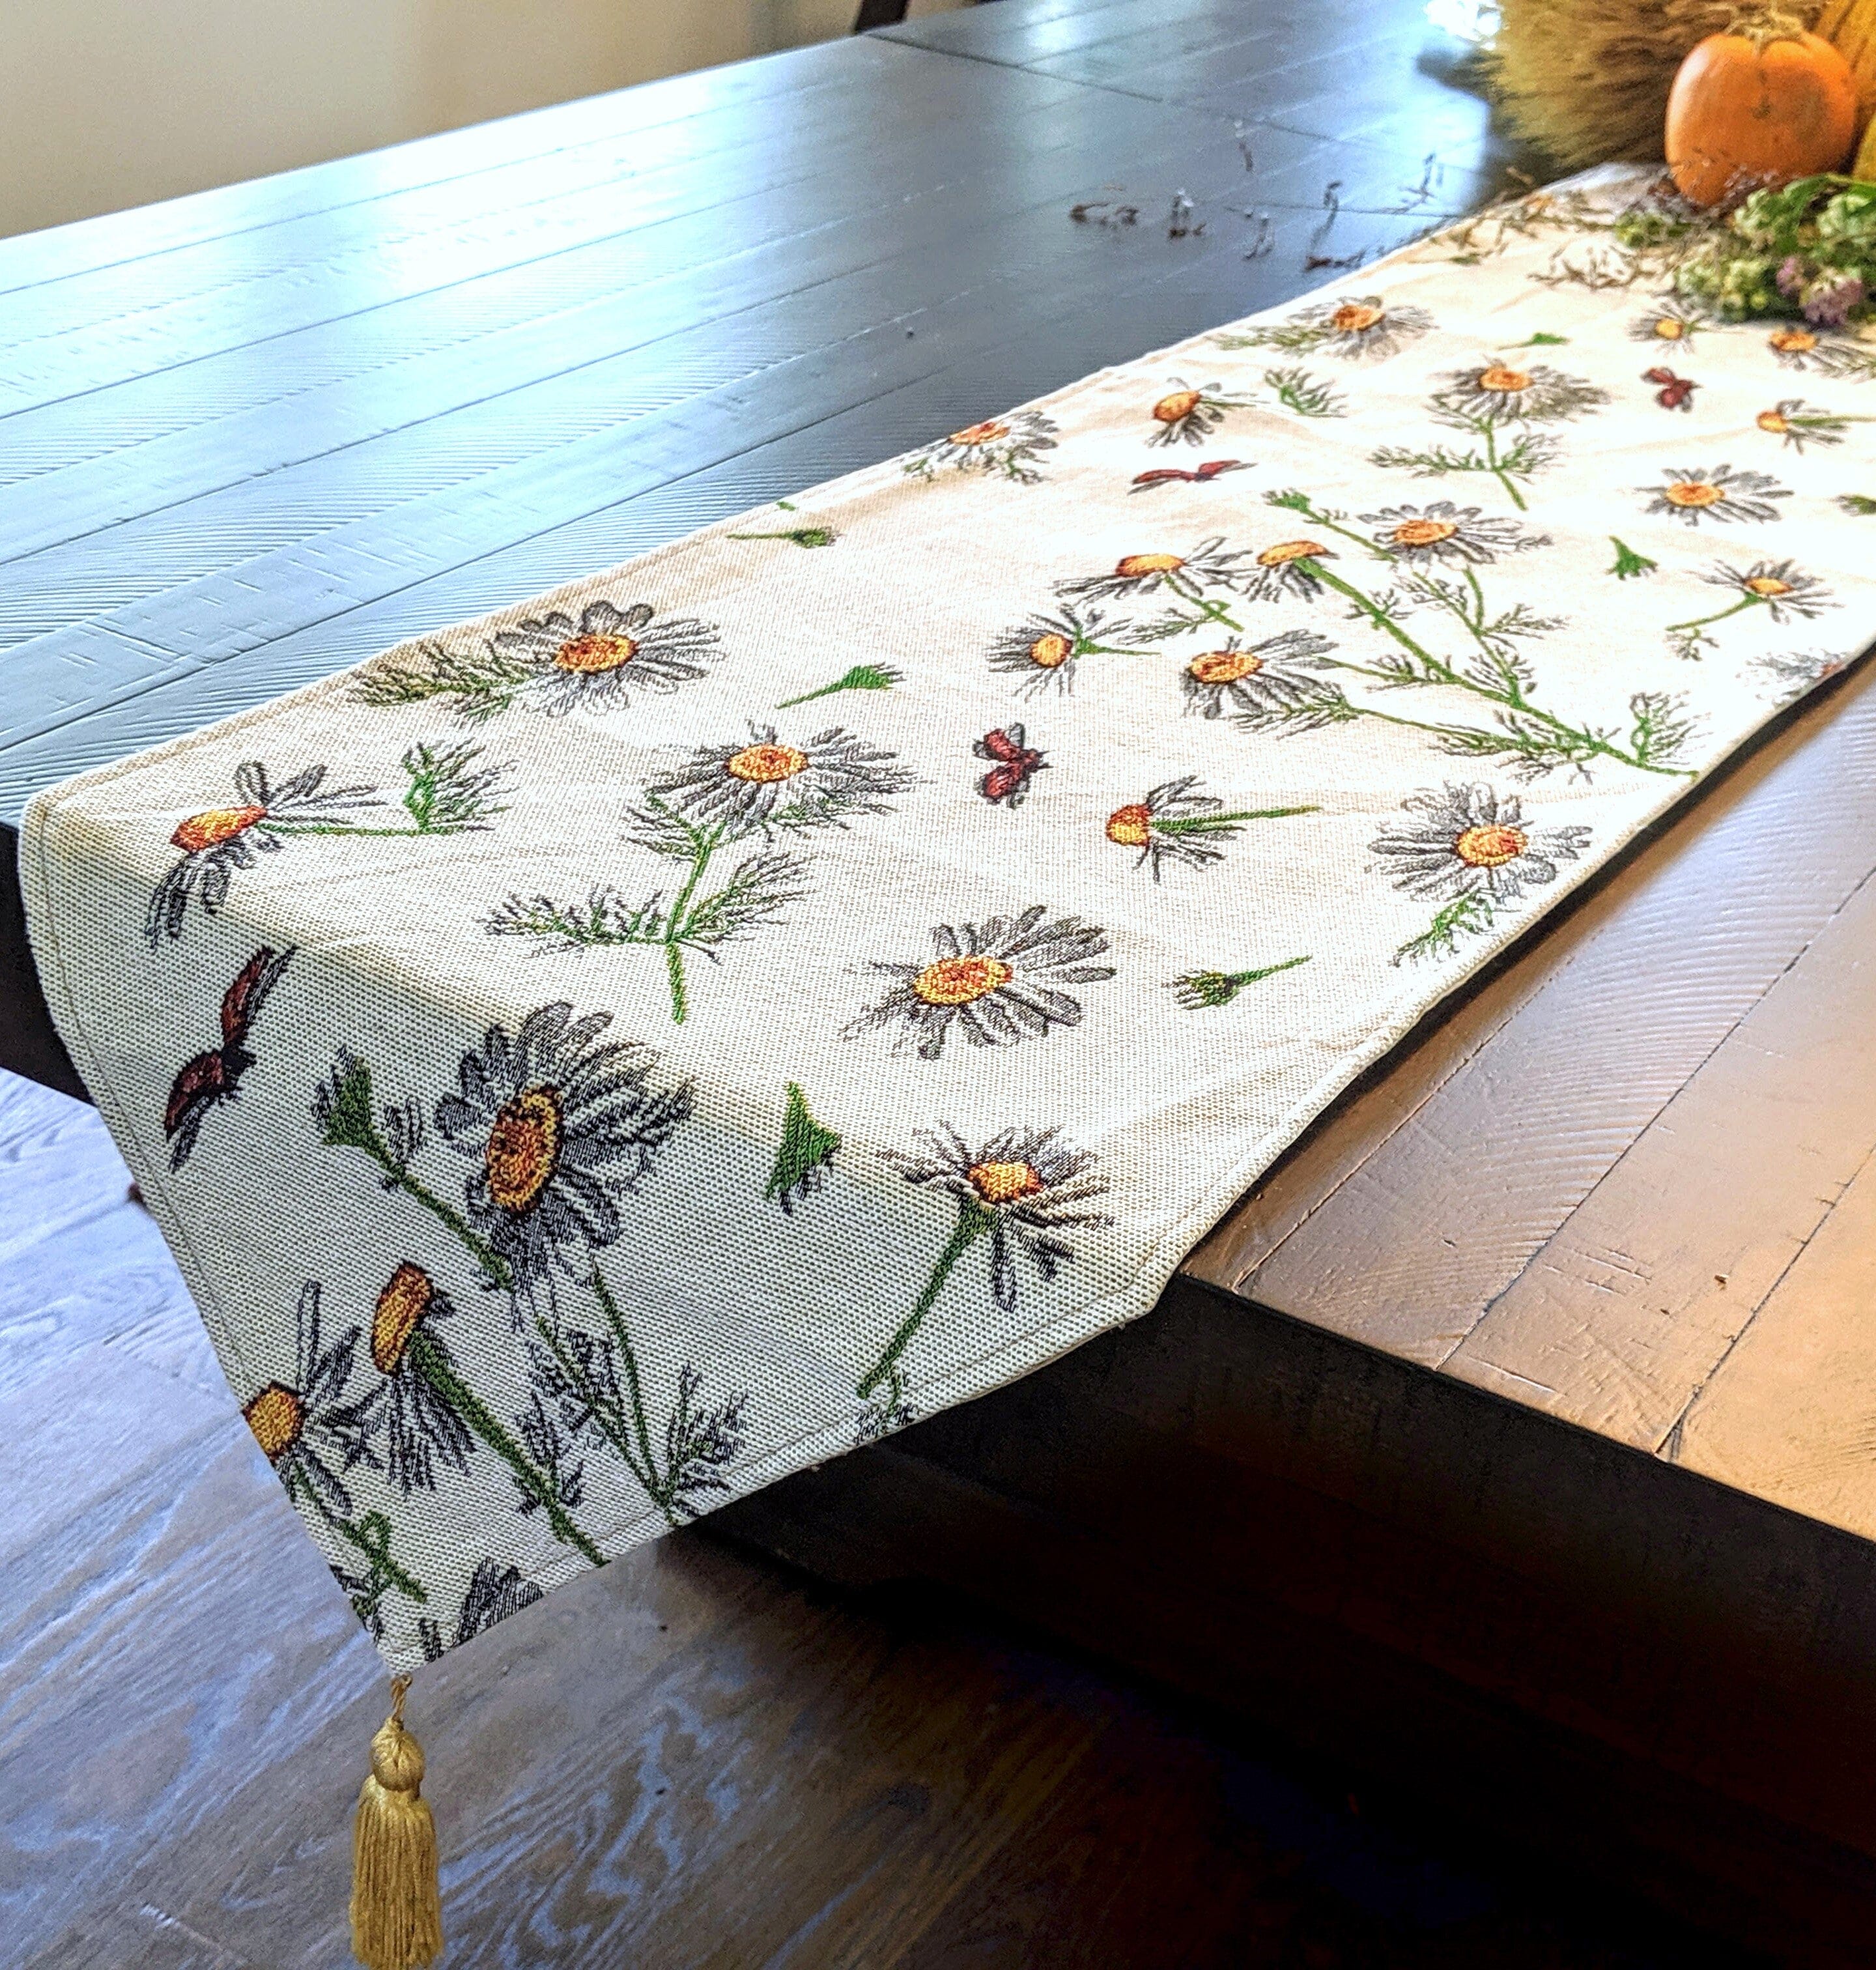 Tache Floral Yellow Daisies Ladybugs Ivory Woven Tapestry Table Runner (18114) - Tache Home Fashion